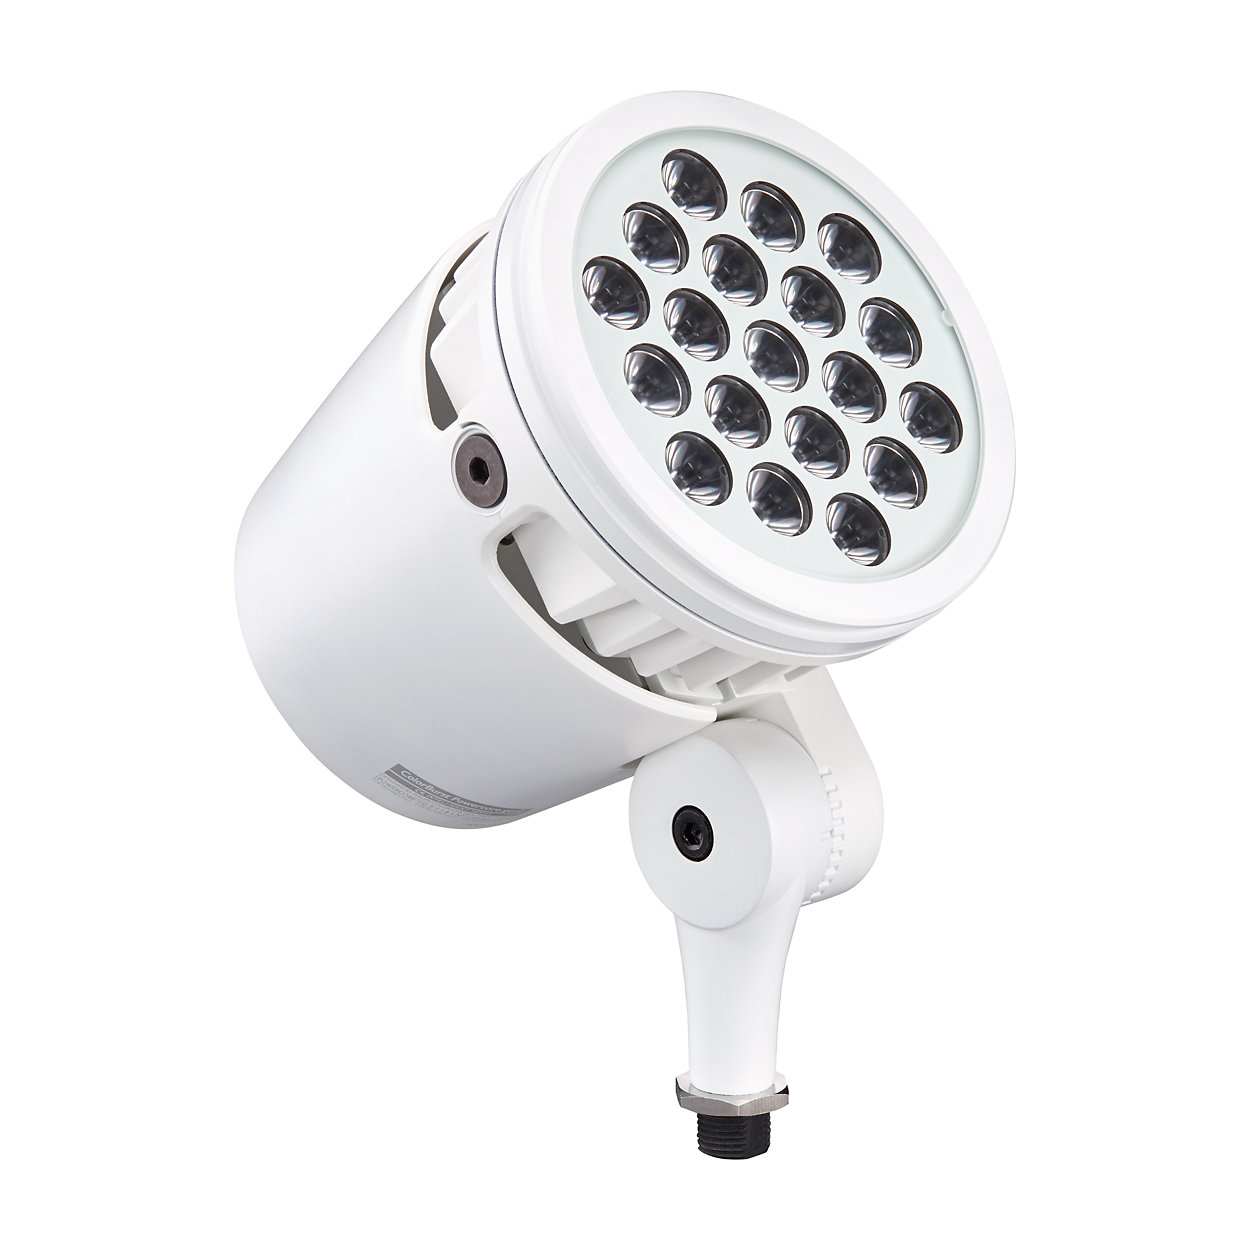 LED spotlight with intelligent white and color light